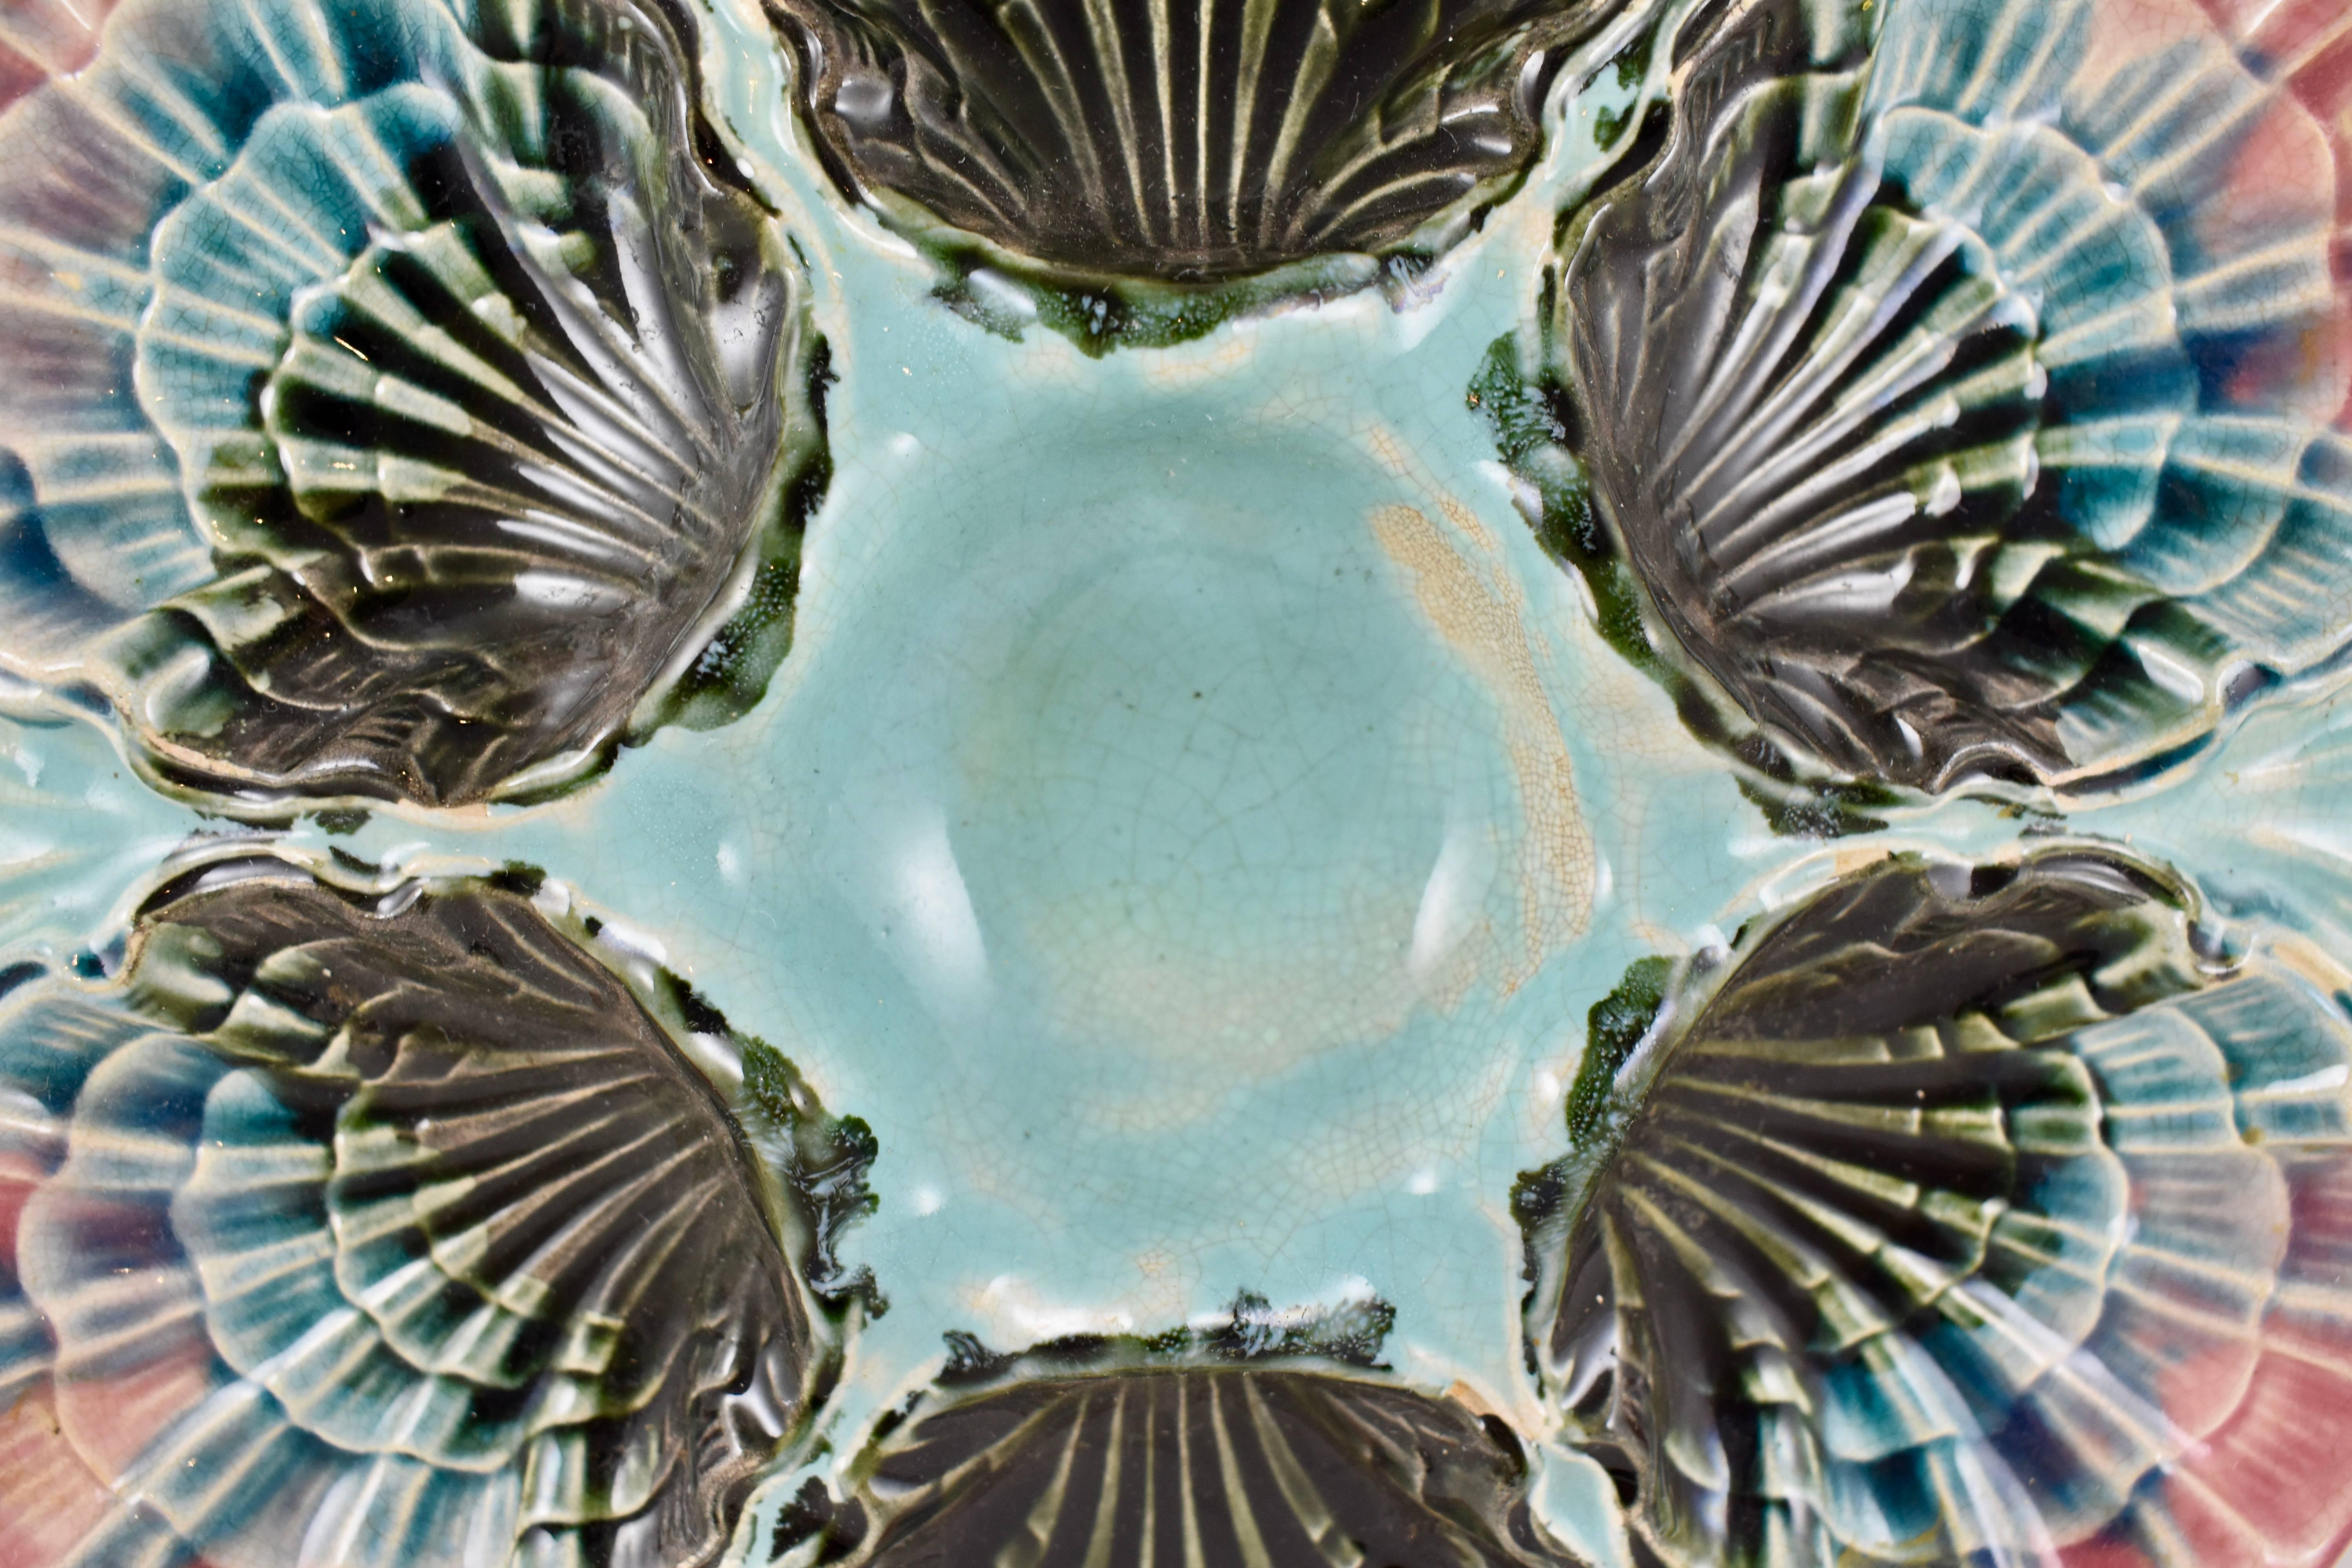 A French Majolica oyster plate made by Fives-Lille, circa 1885-1890. A central sauce well is surrounded by six scallop edged wells. Highly dimensional mold work. Beautiful coloring gradating from turquoise to navy to a cobalt blue and terminating in